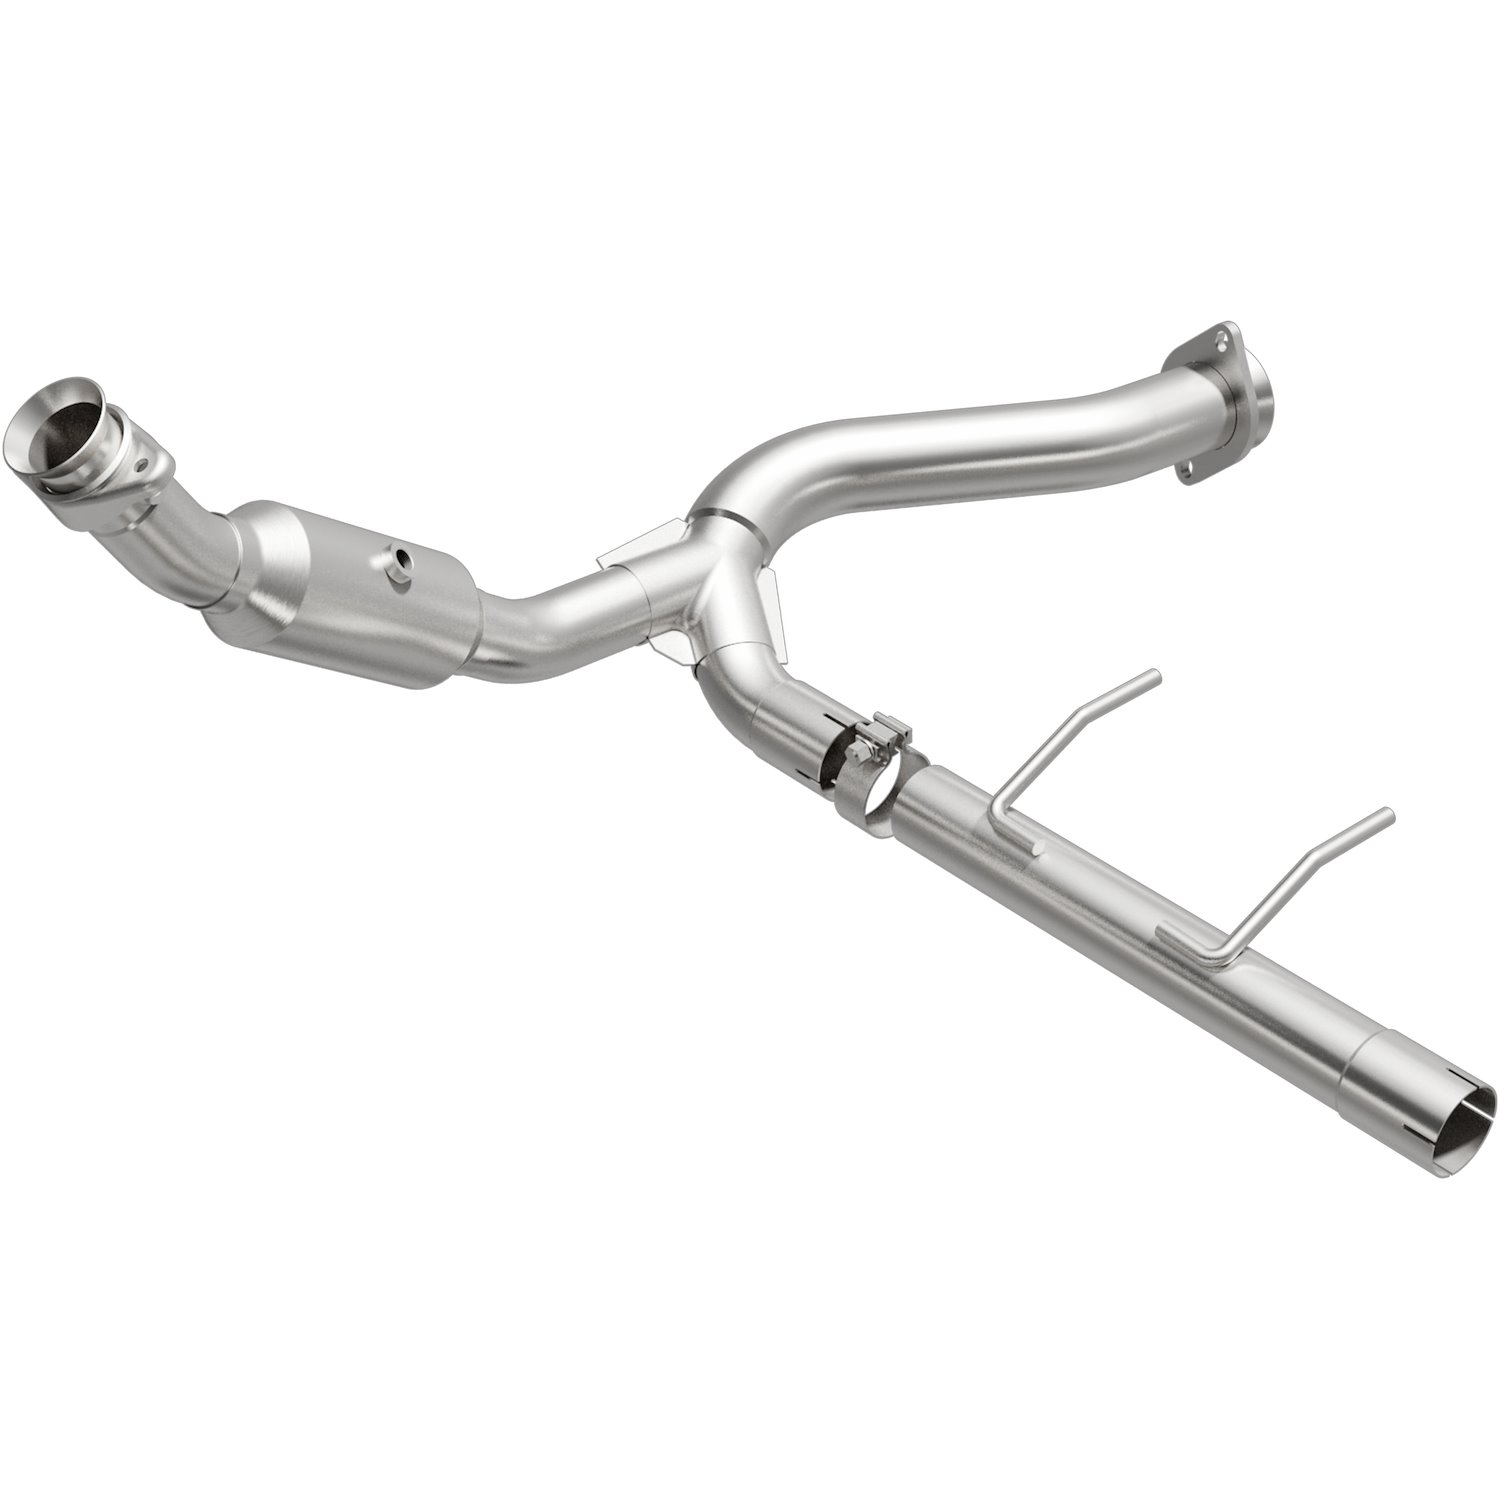 OEM Grade Federal / EPA Compliant Direct-Fit Catalytic Converter 49500